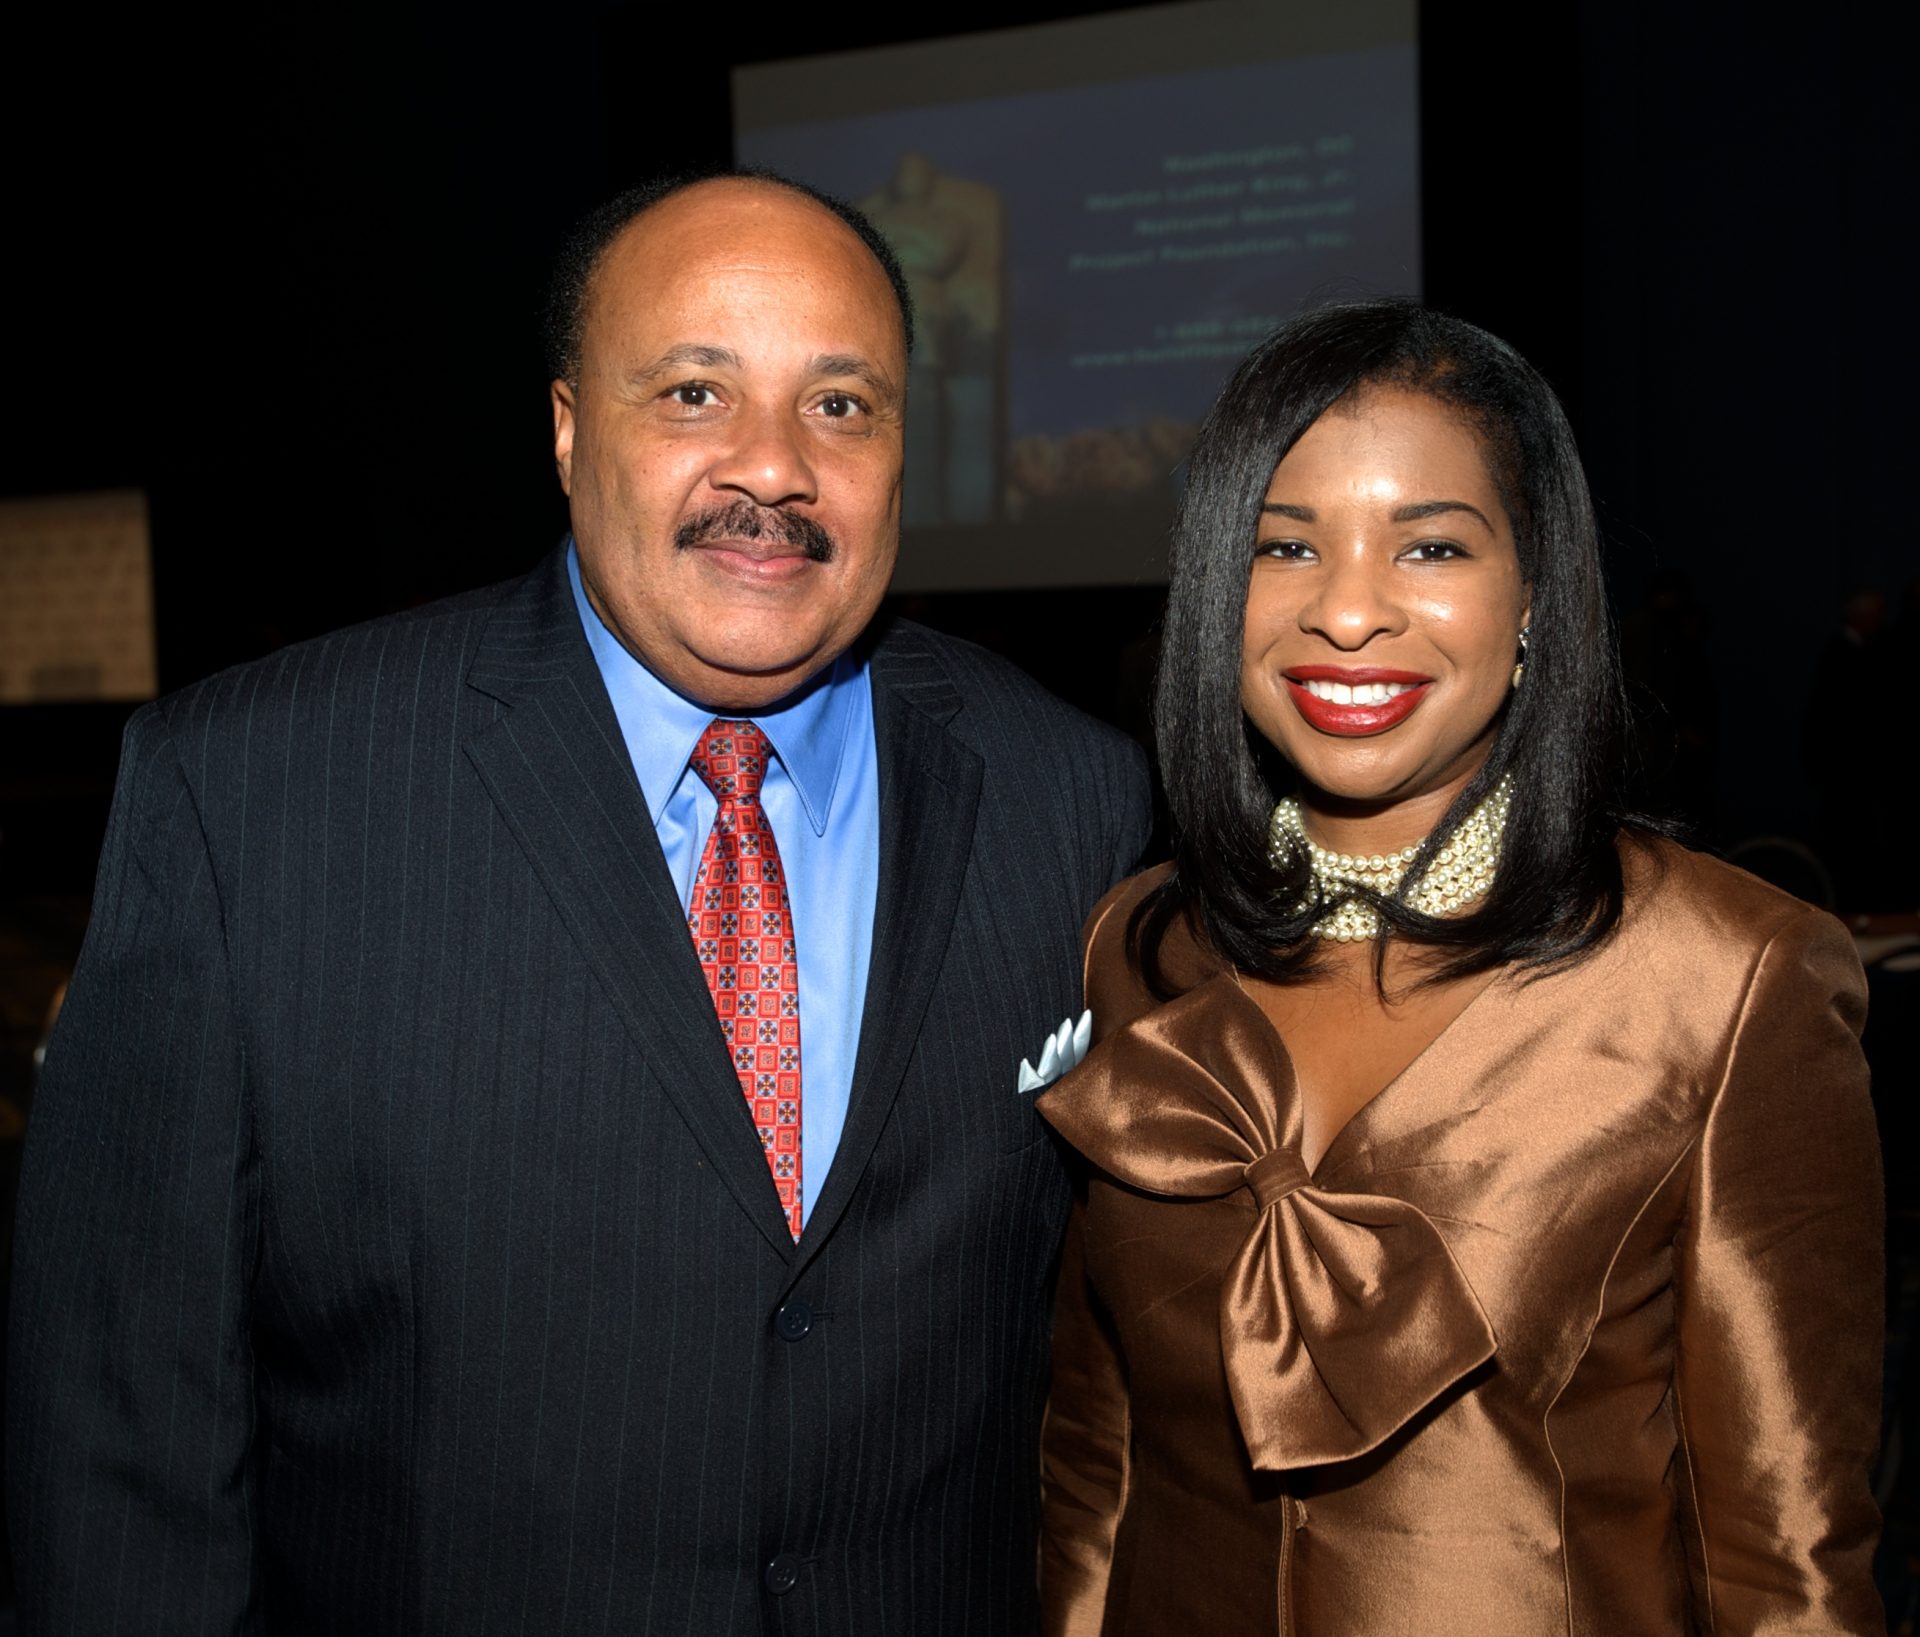 WASHINGTON, DC - SEPTEMBER 23: Martin Luther King III and his wife Andrea Waters King attend the Congressional Black Caucus Foundation's 41st annual legislative conference on September 23, 2011 in Washington, DC.